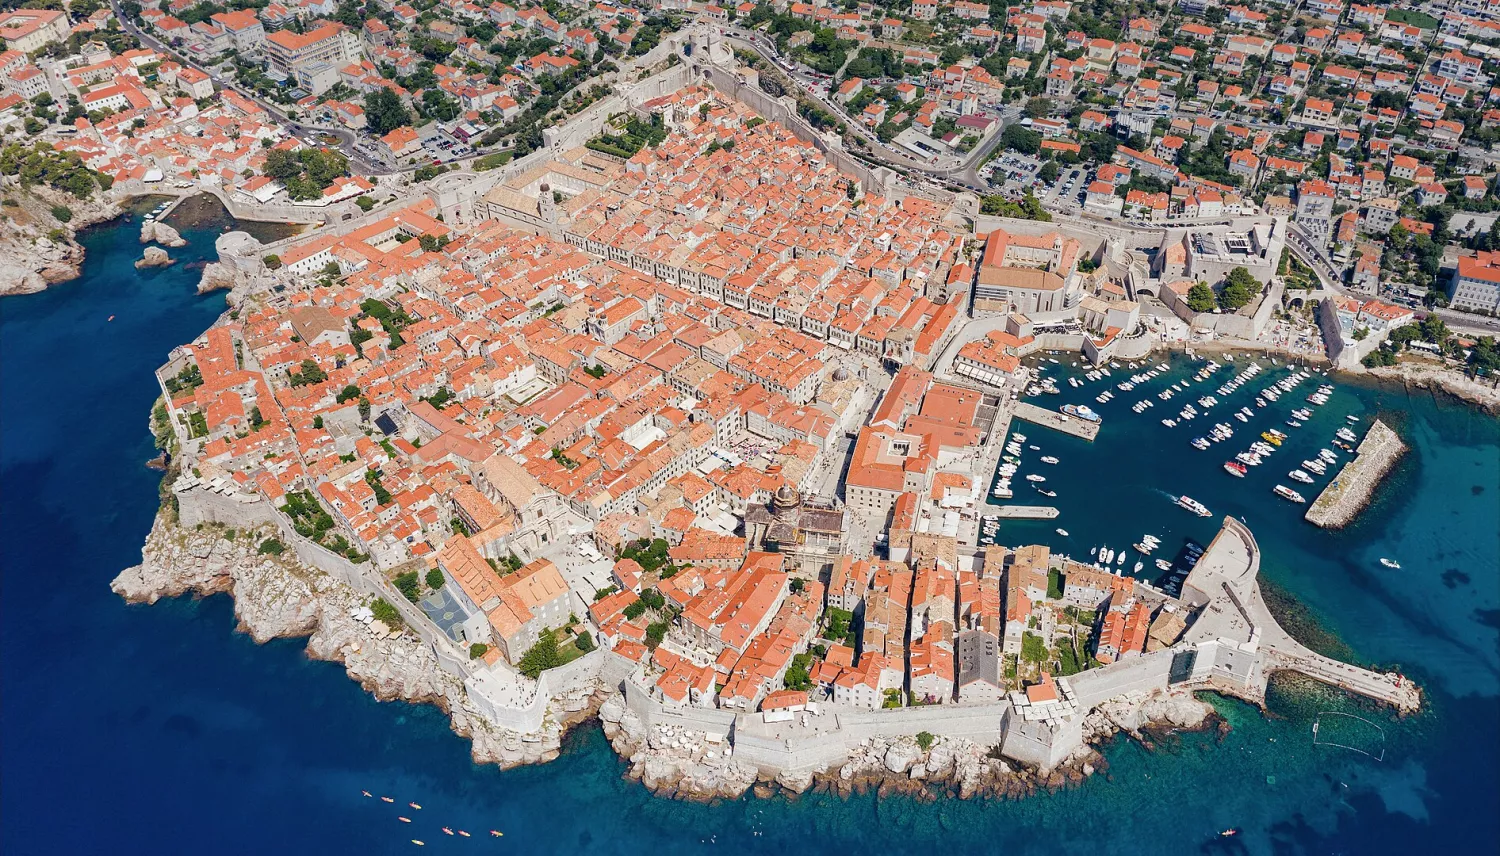 Old Port and historical center of Dubrovnik - Croatia